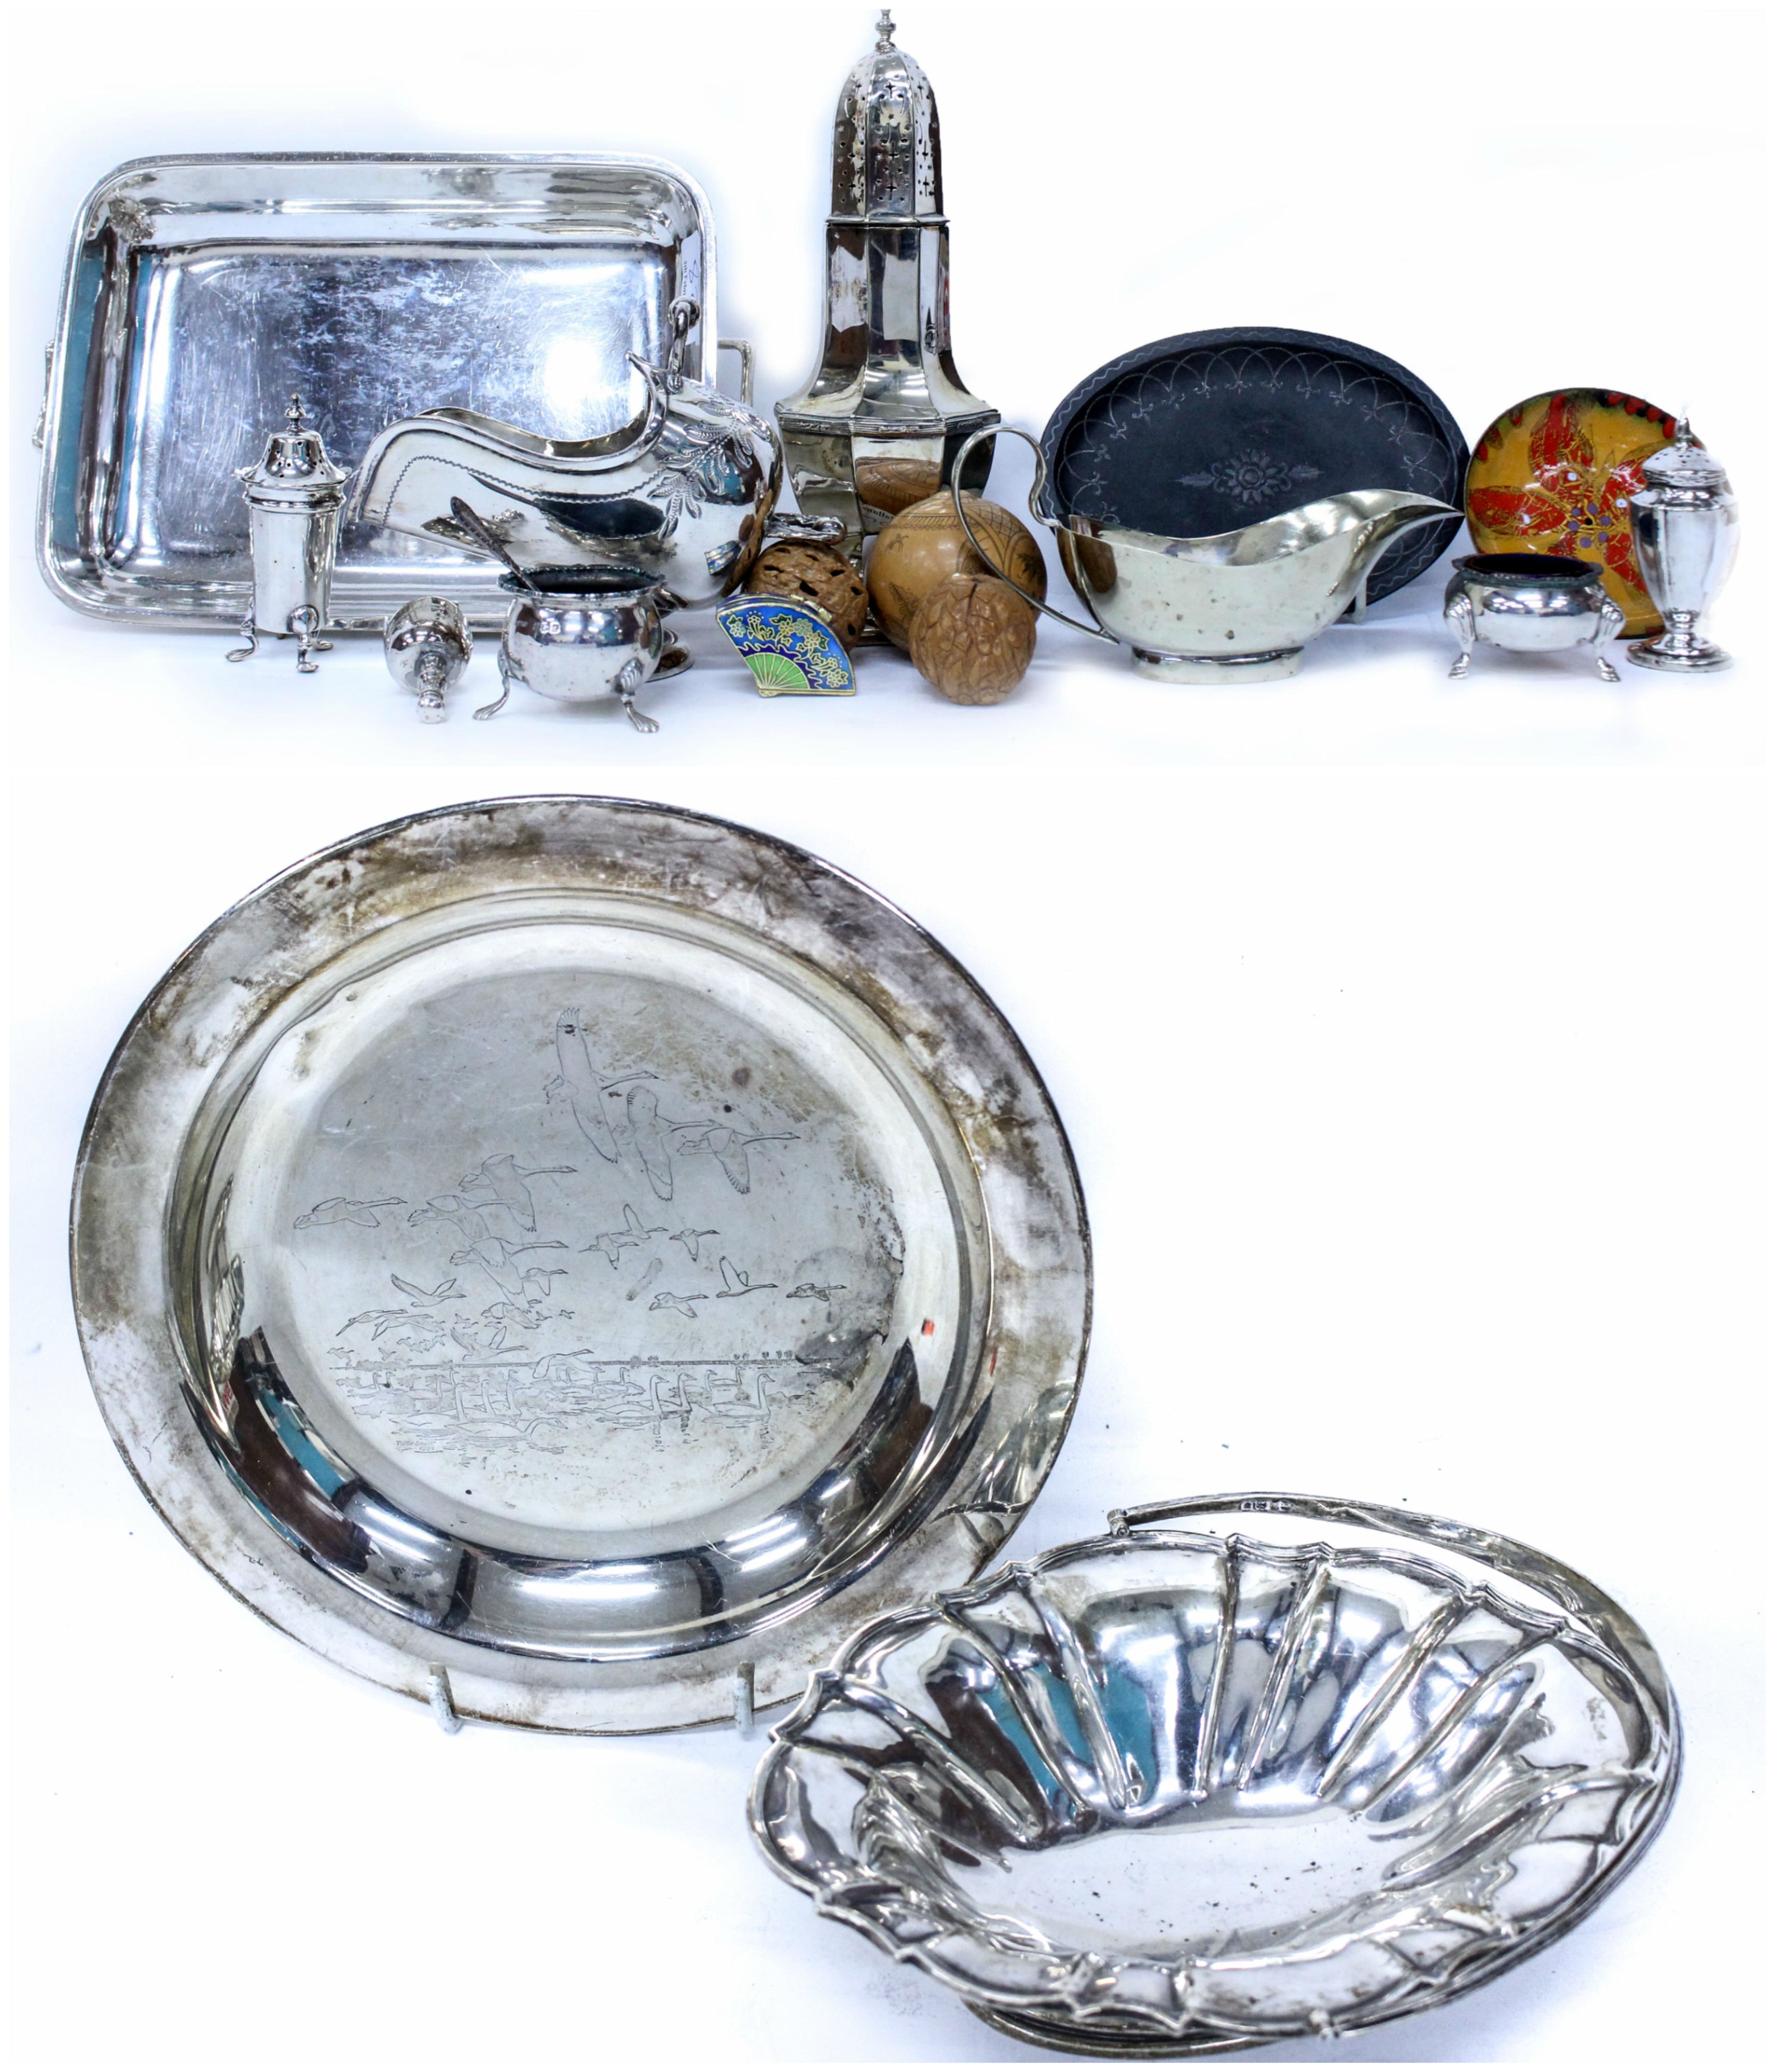 A SMALL SILVER OVAL BONBON DISH with looping handle, together with a small silver plate decorated